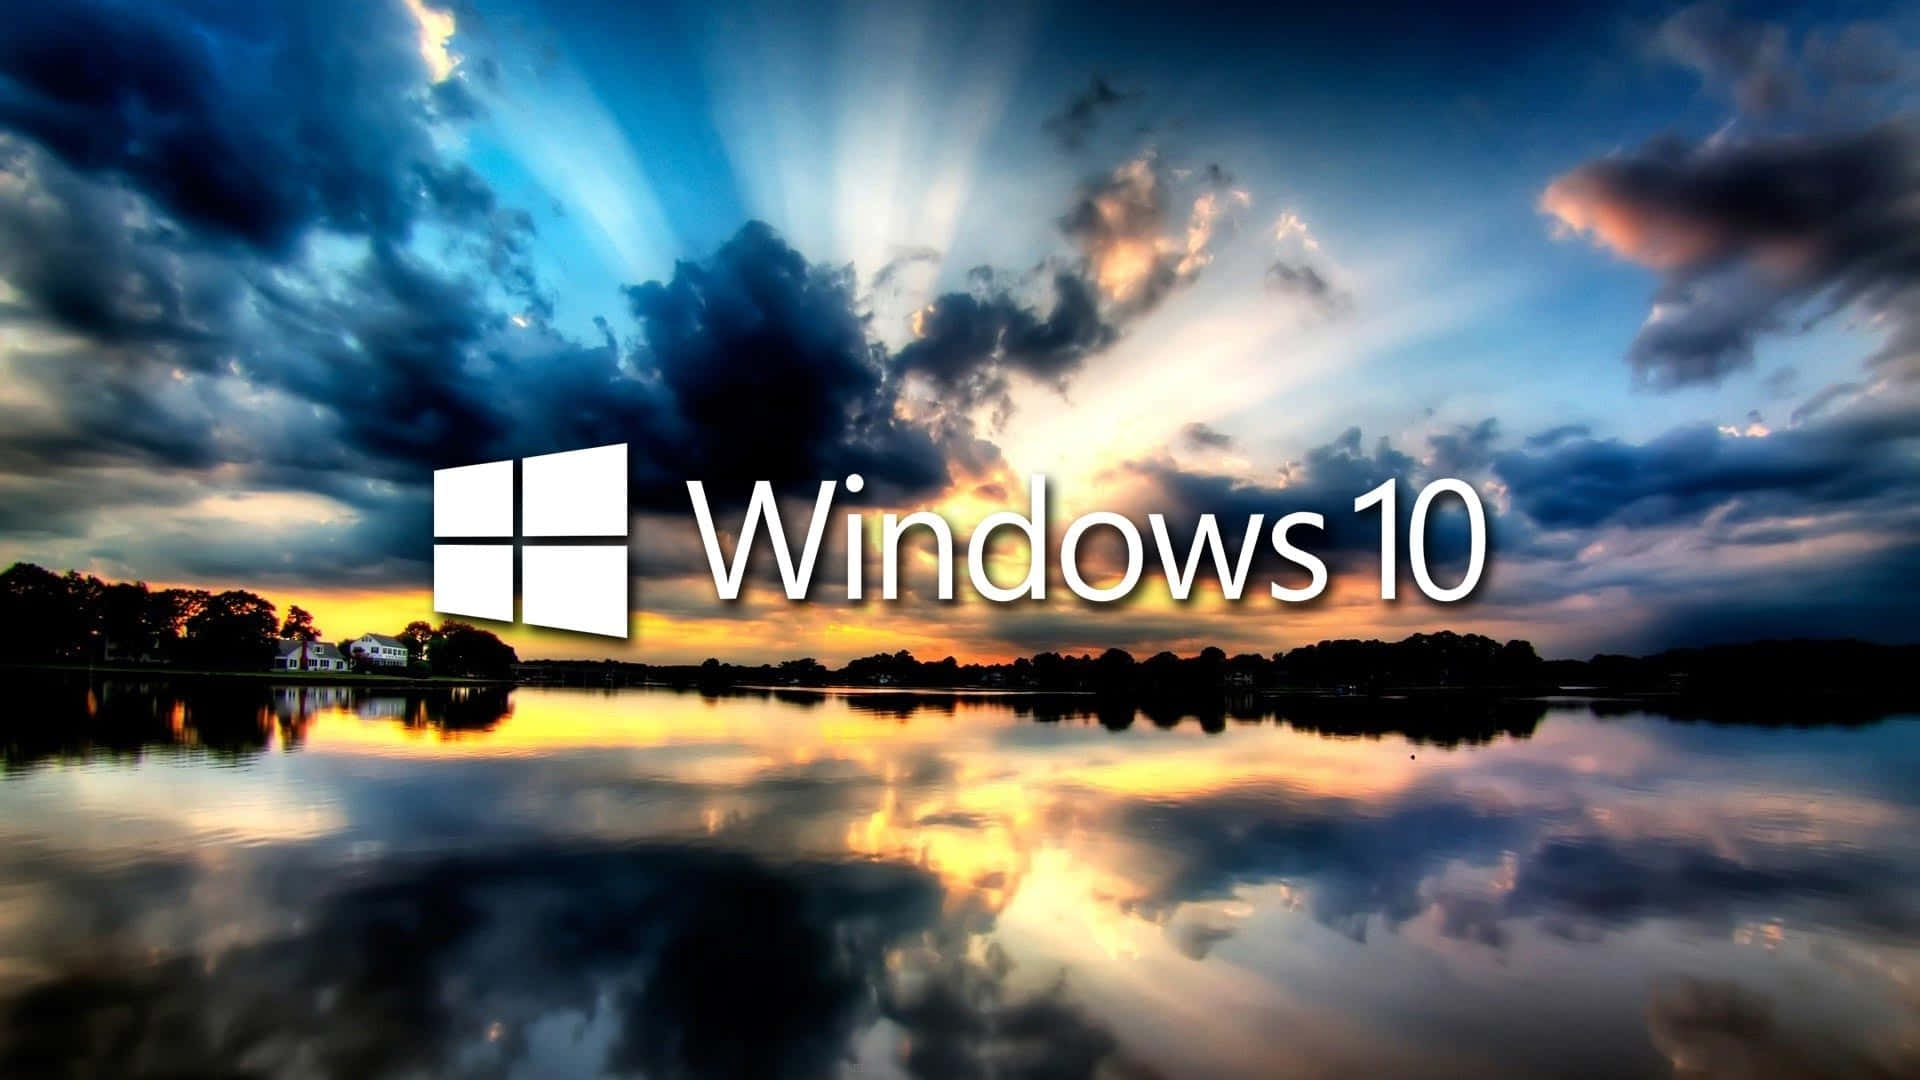 Get Organized and Increase Productivity with Windows 10